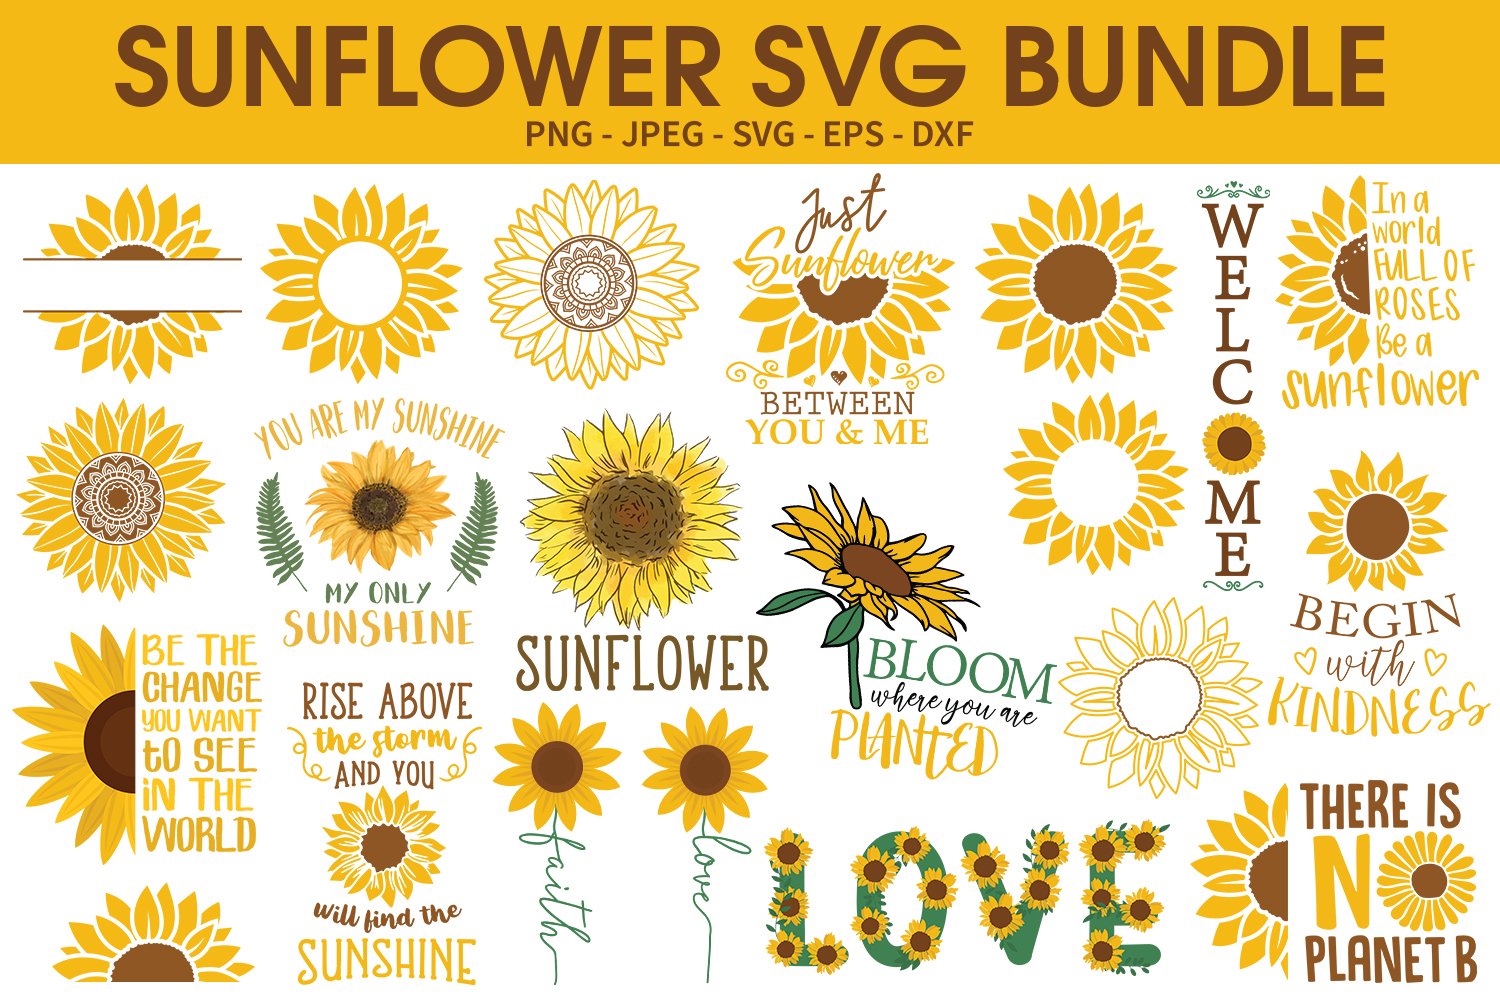 Diverse of sunflowers illustrations.